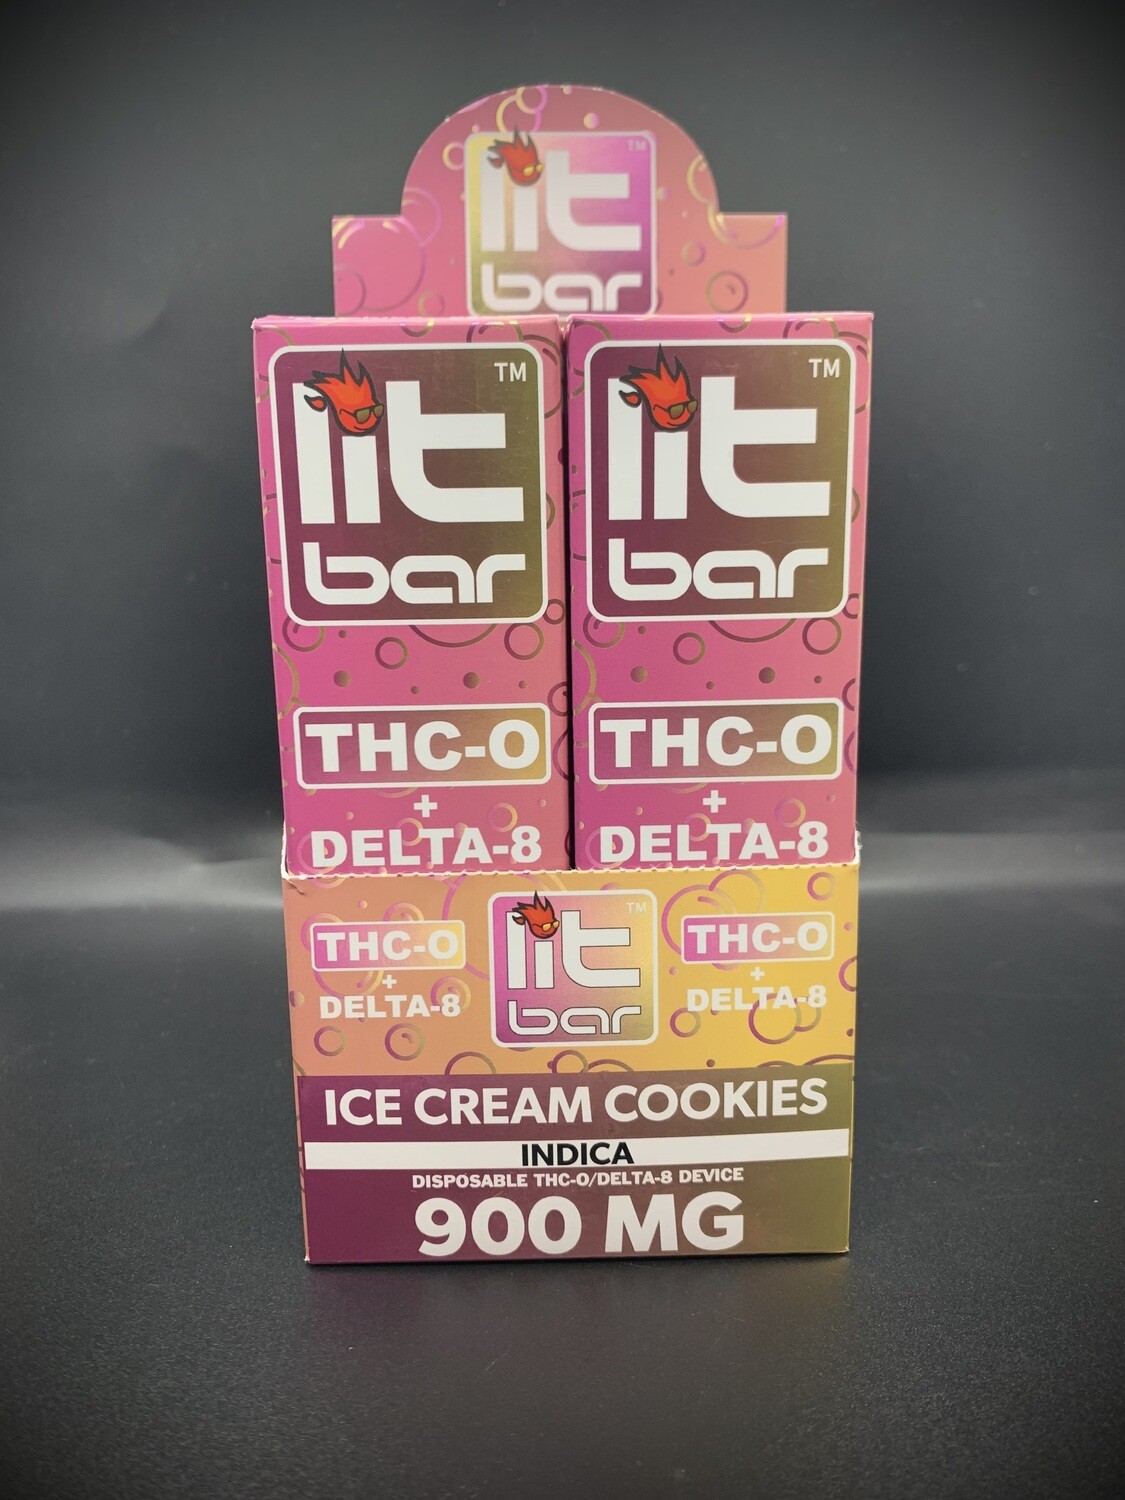 DISP - Stay Lit Bar Ice Cream Cookies THCO Disposable 